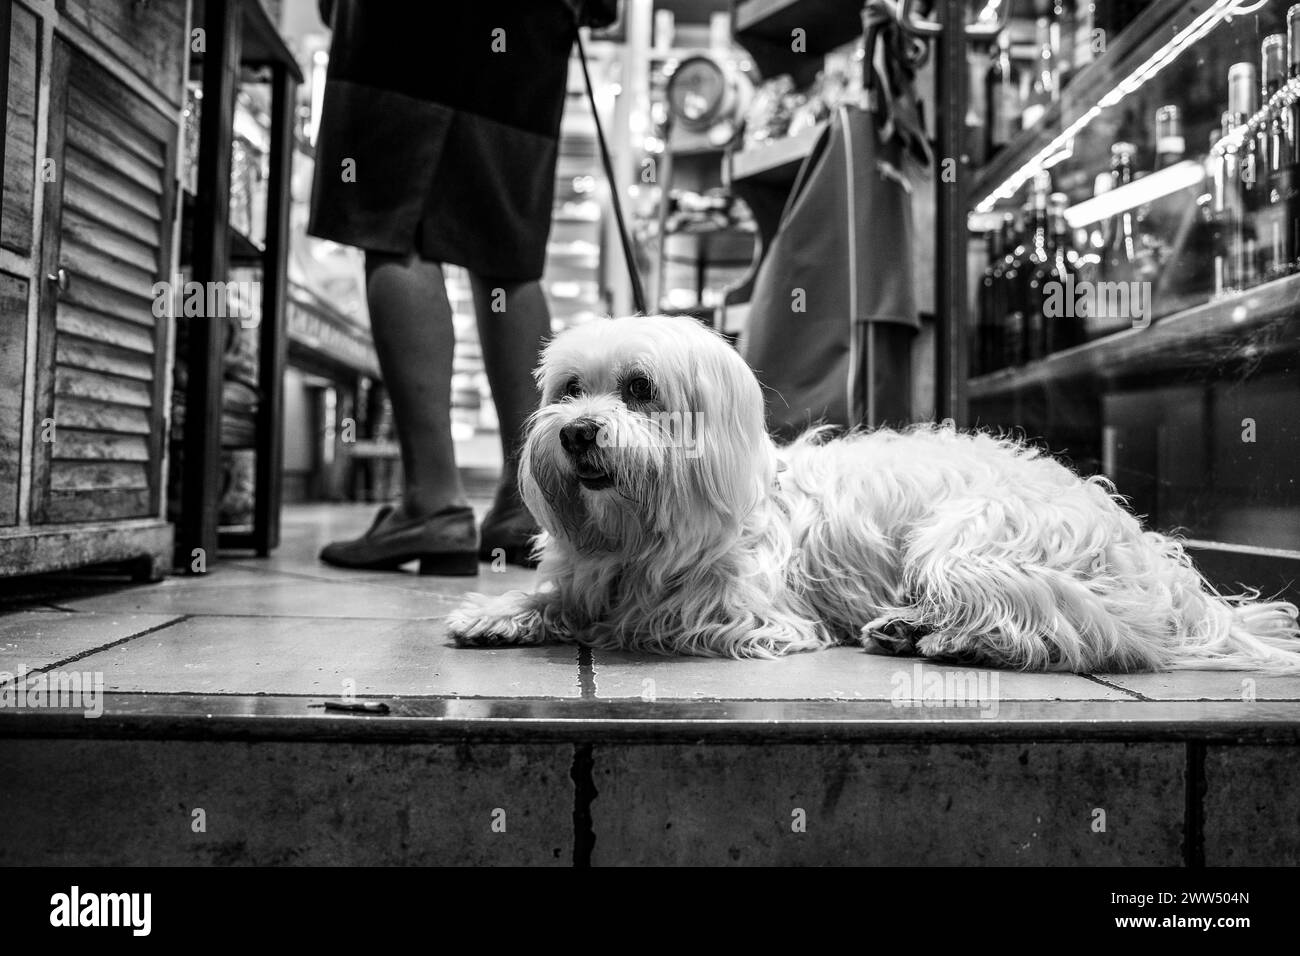 Maltese companion rests at the heart of city bustle, serene amidst the urban rush, captured in stark street photography style and monochromatic tones Stock Photo